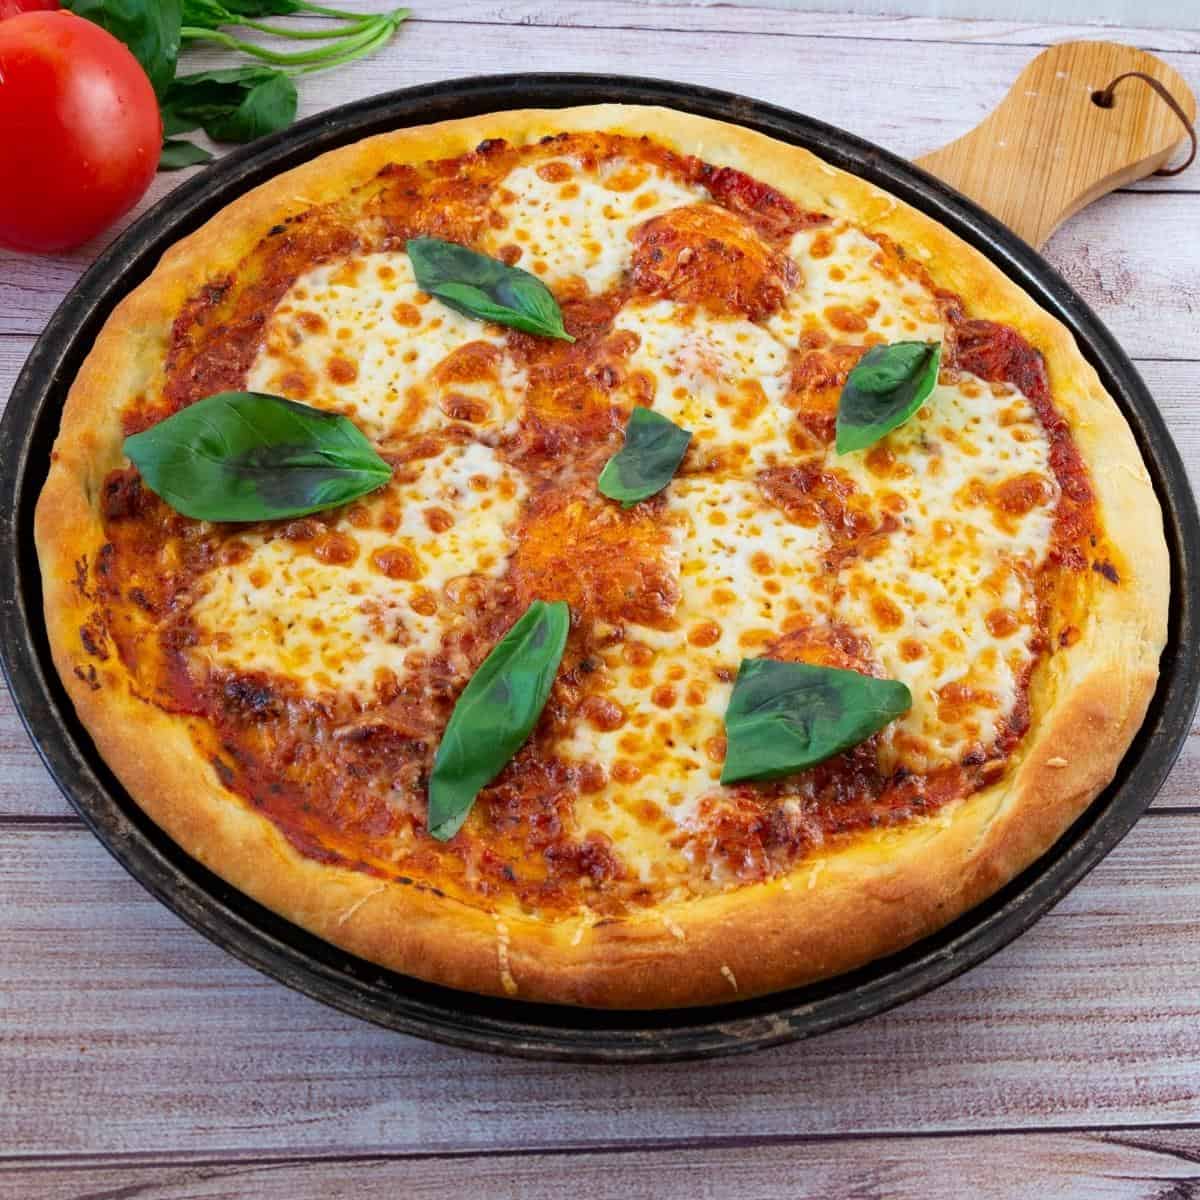 A fresh baked pizza on the pizza pan.